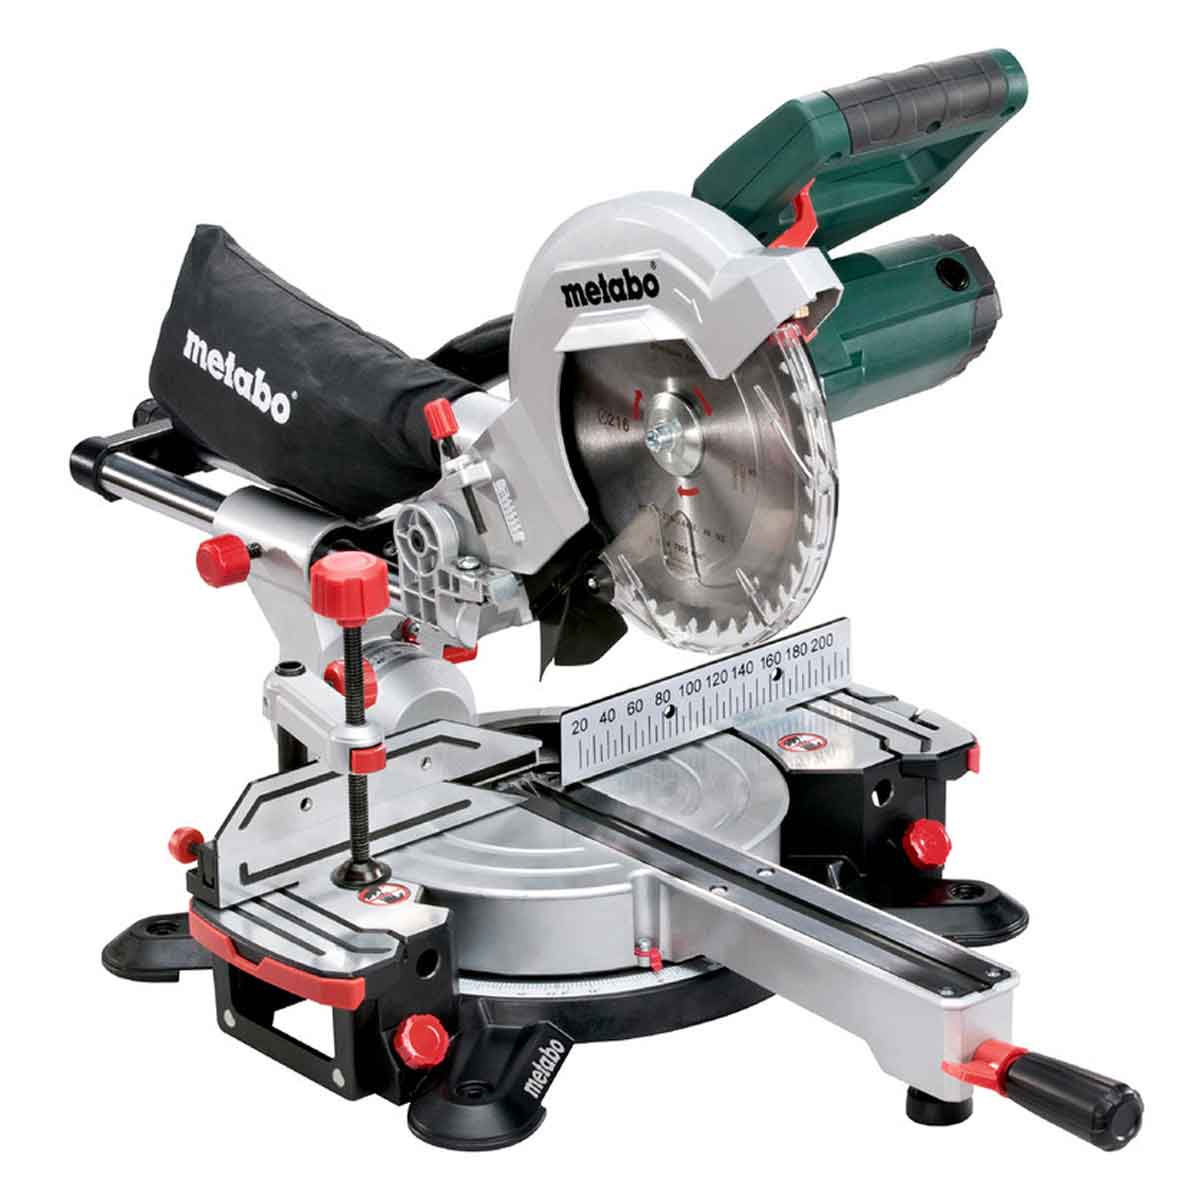 Metabo KGS216M 216mm Sliding Mitre Saw 240V with Leg Stand